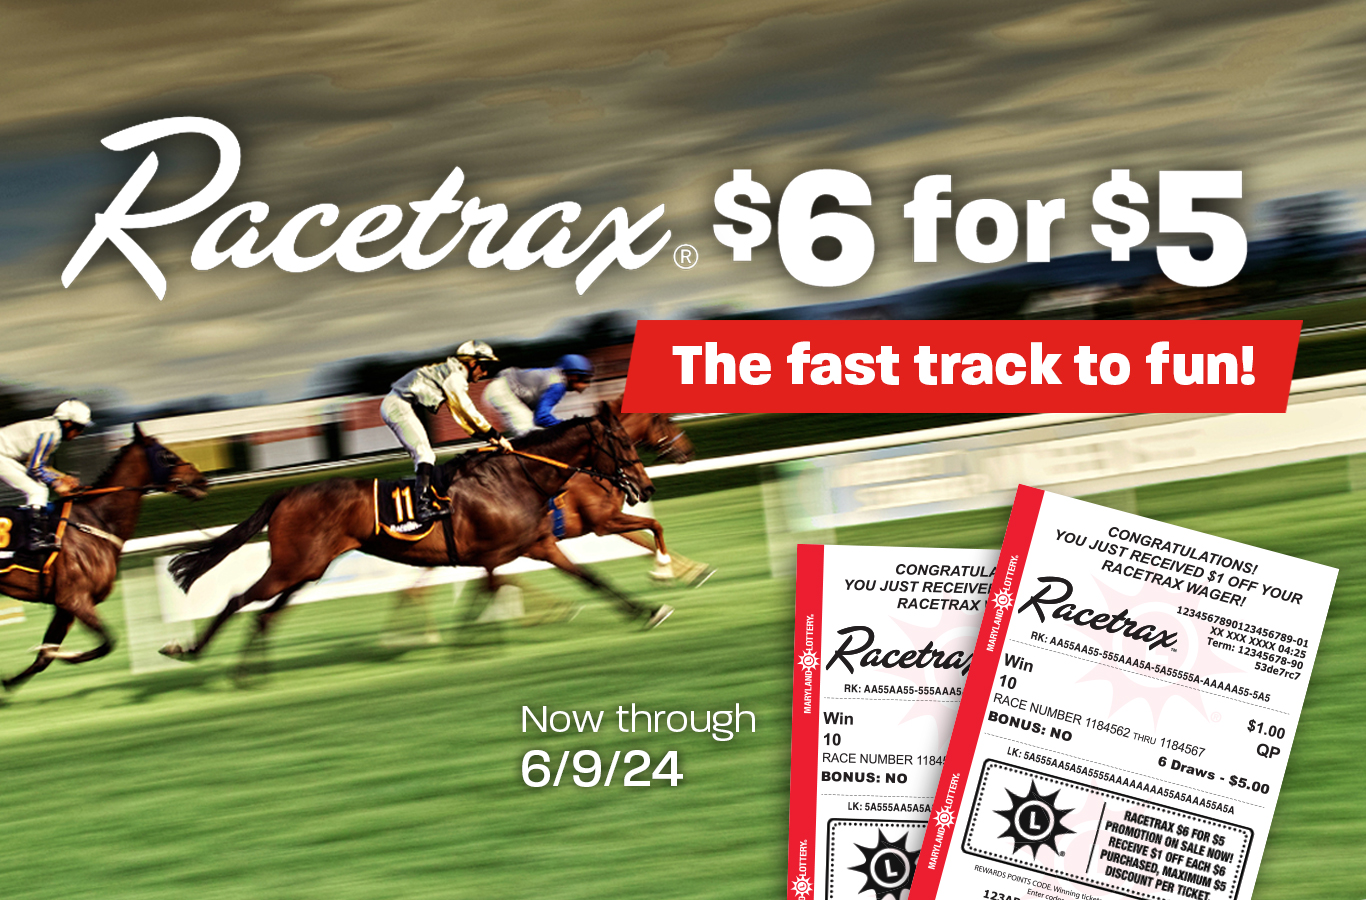 We're off to the races! ANY $6 Racetrax® purchase will receive a $1 discount!